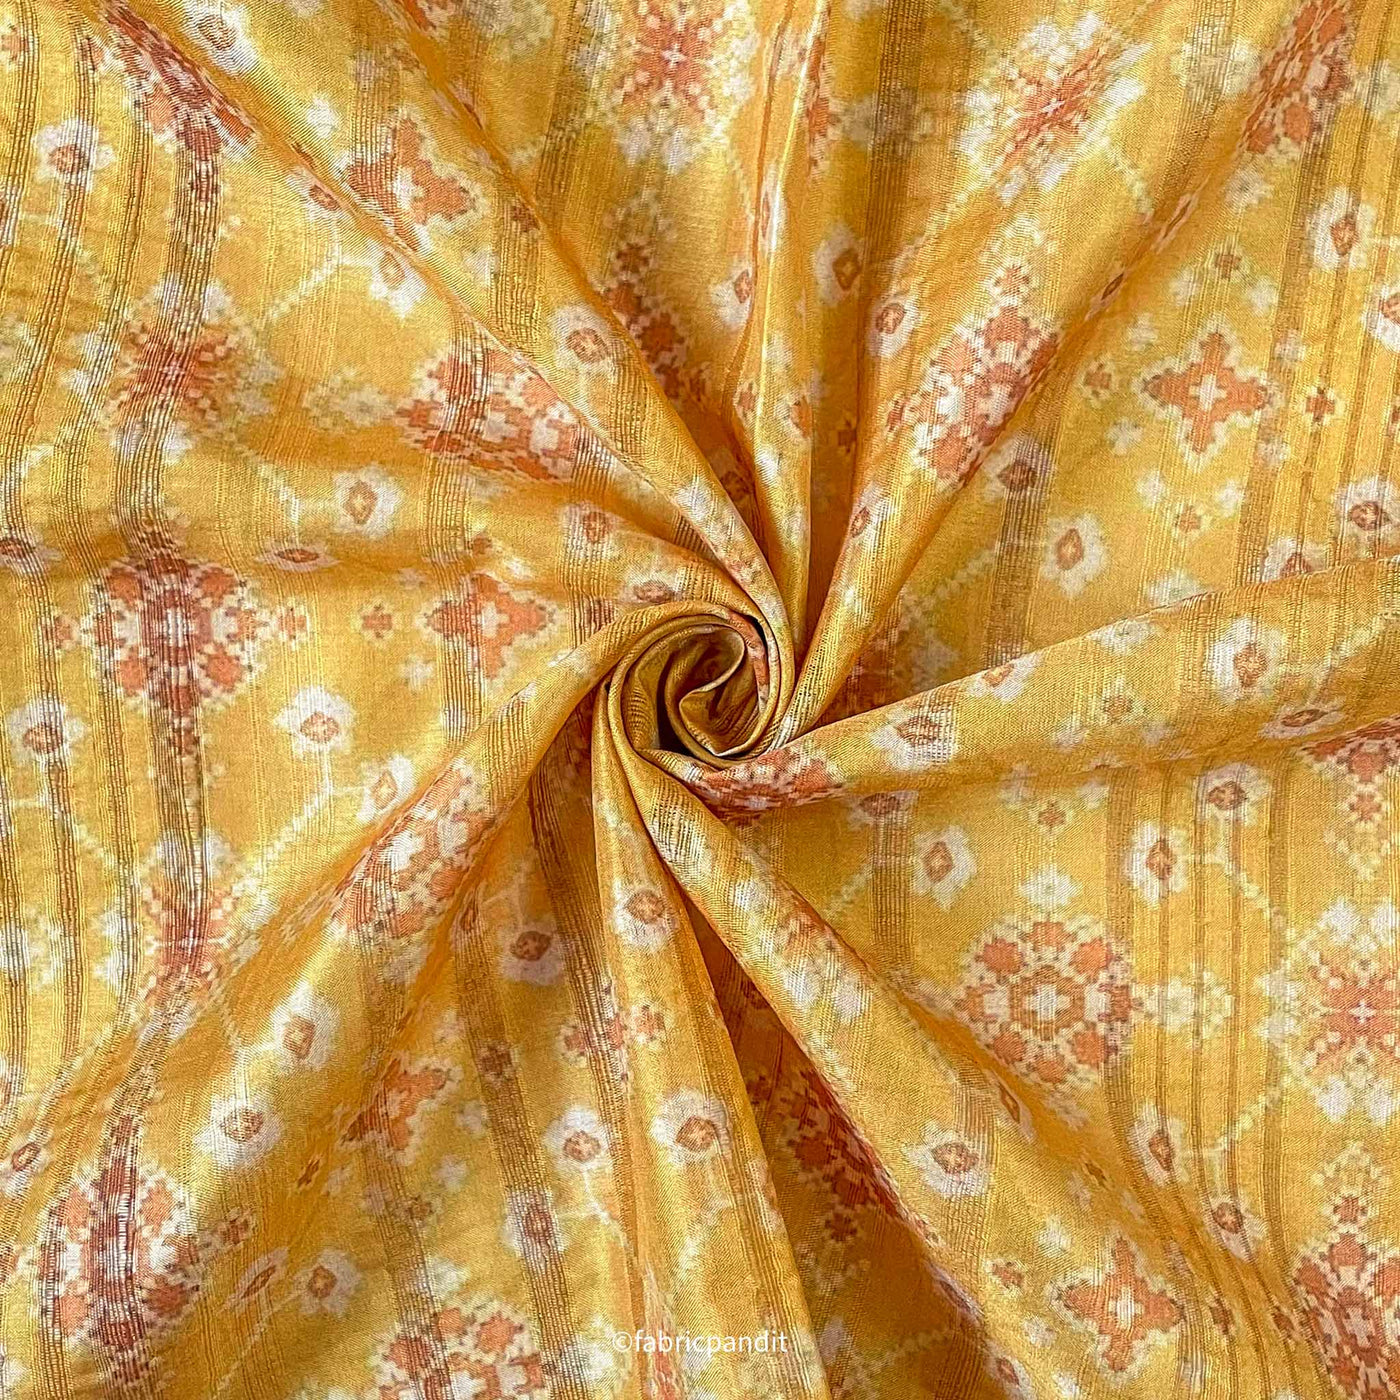 Fabric Pandit Cut Piece (CUT PIECE) Classic Yellow Abstract Patola Digital Printed Tussar Silk Fabric (Width 44 Inches)